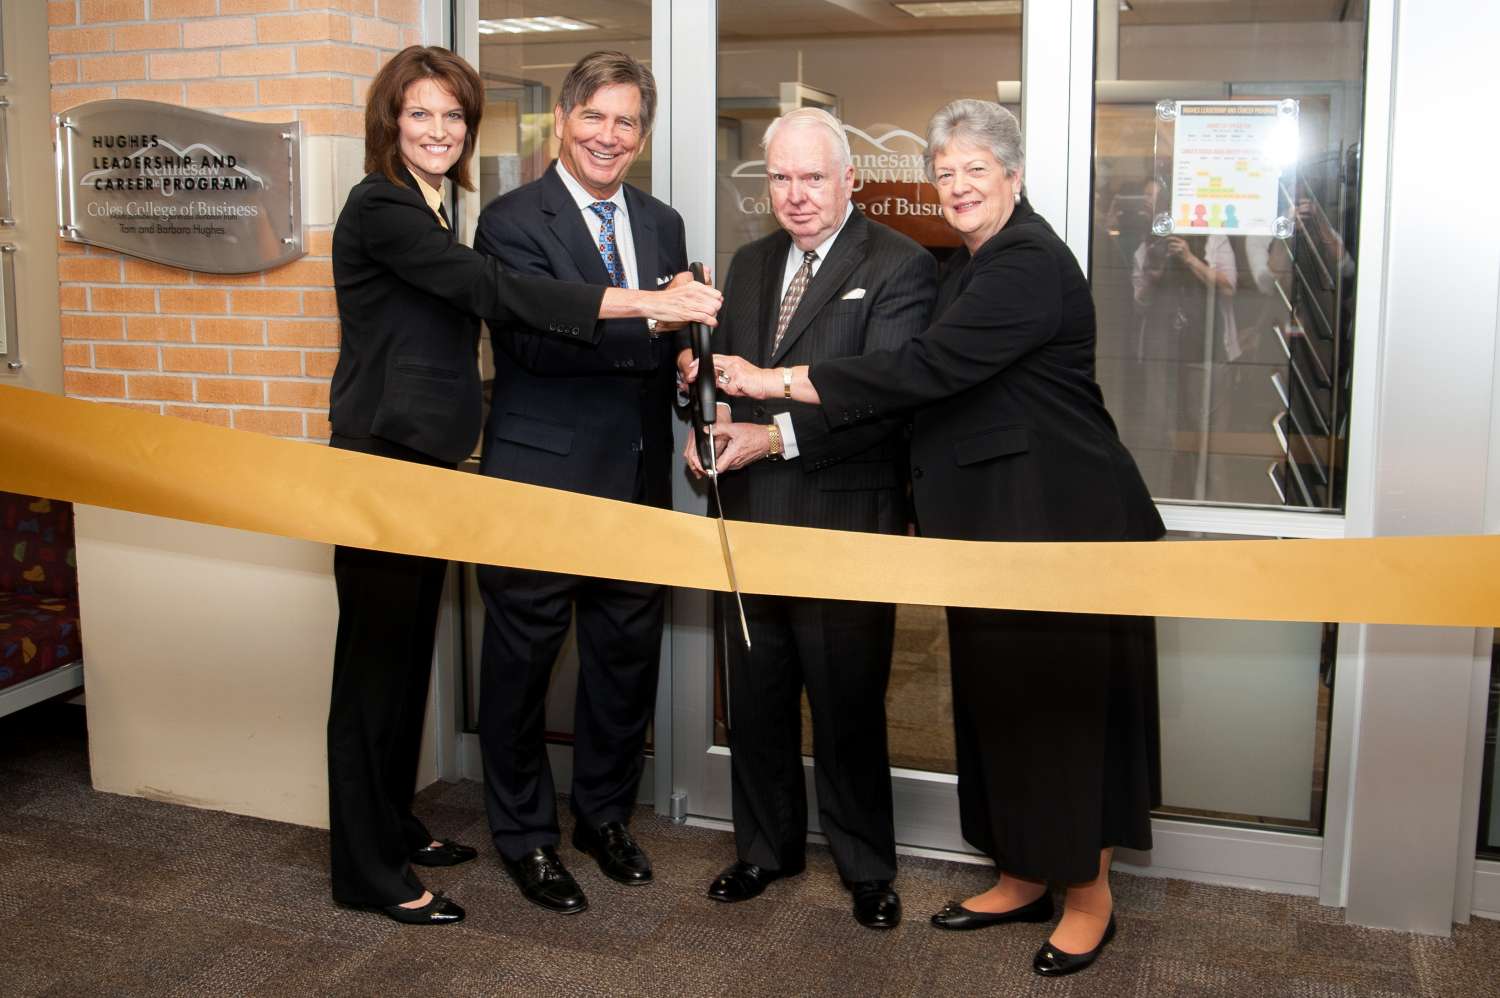 New career center opens opportunities for business students